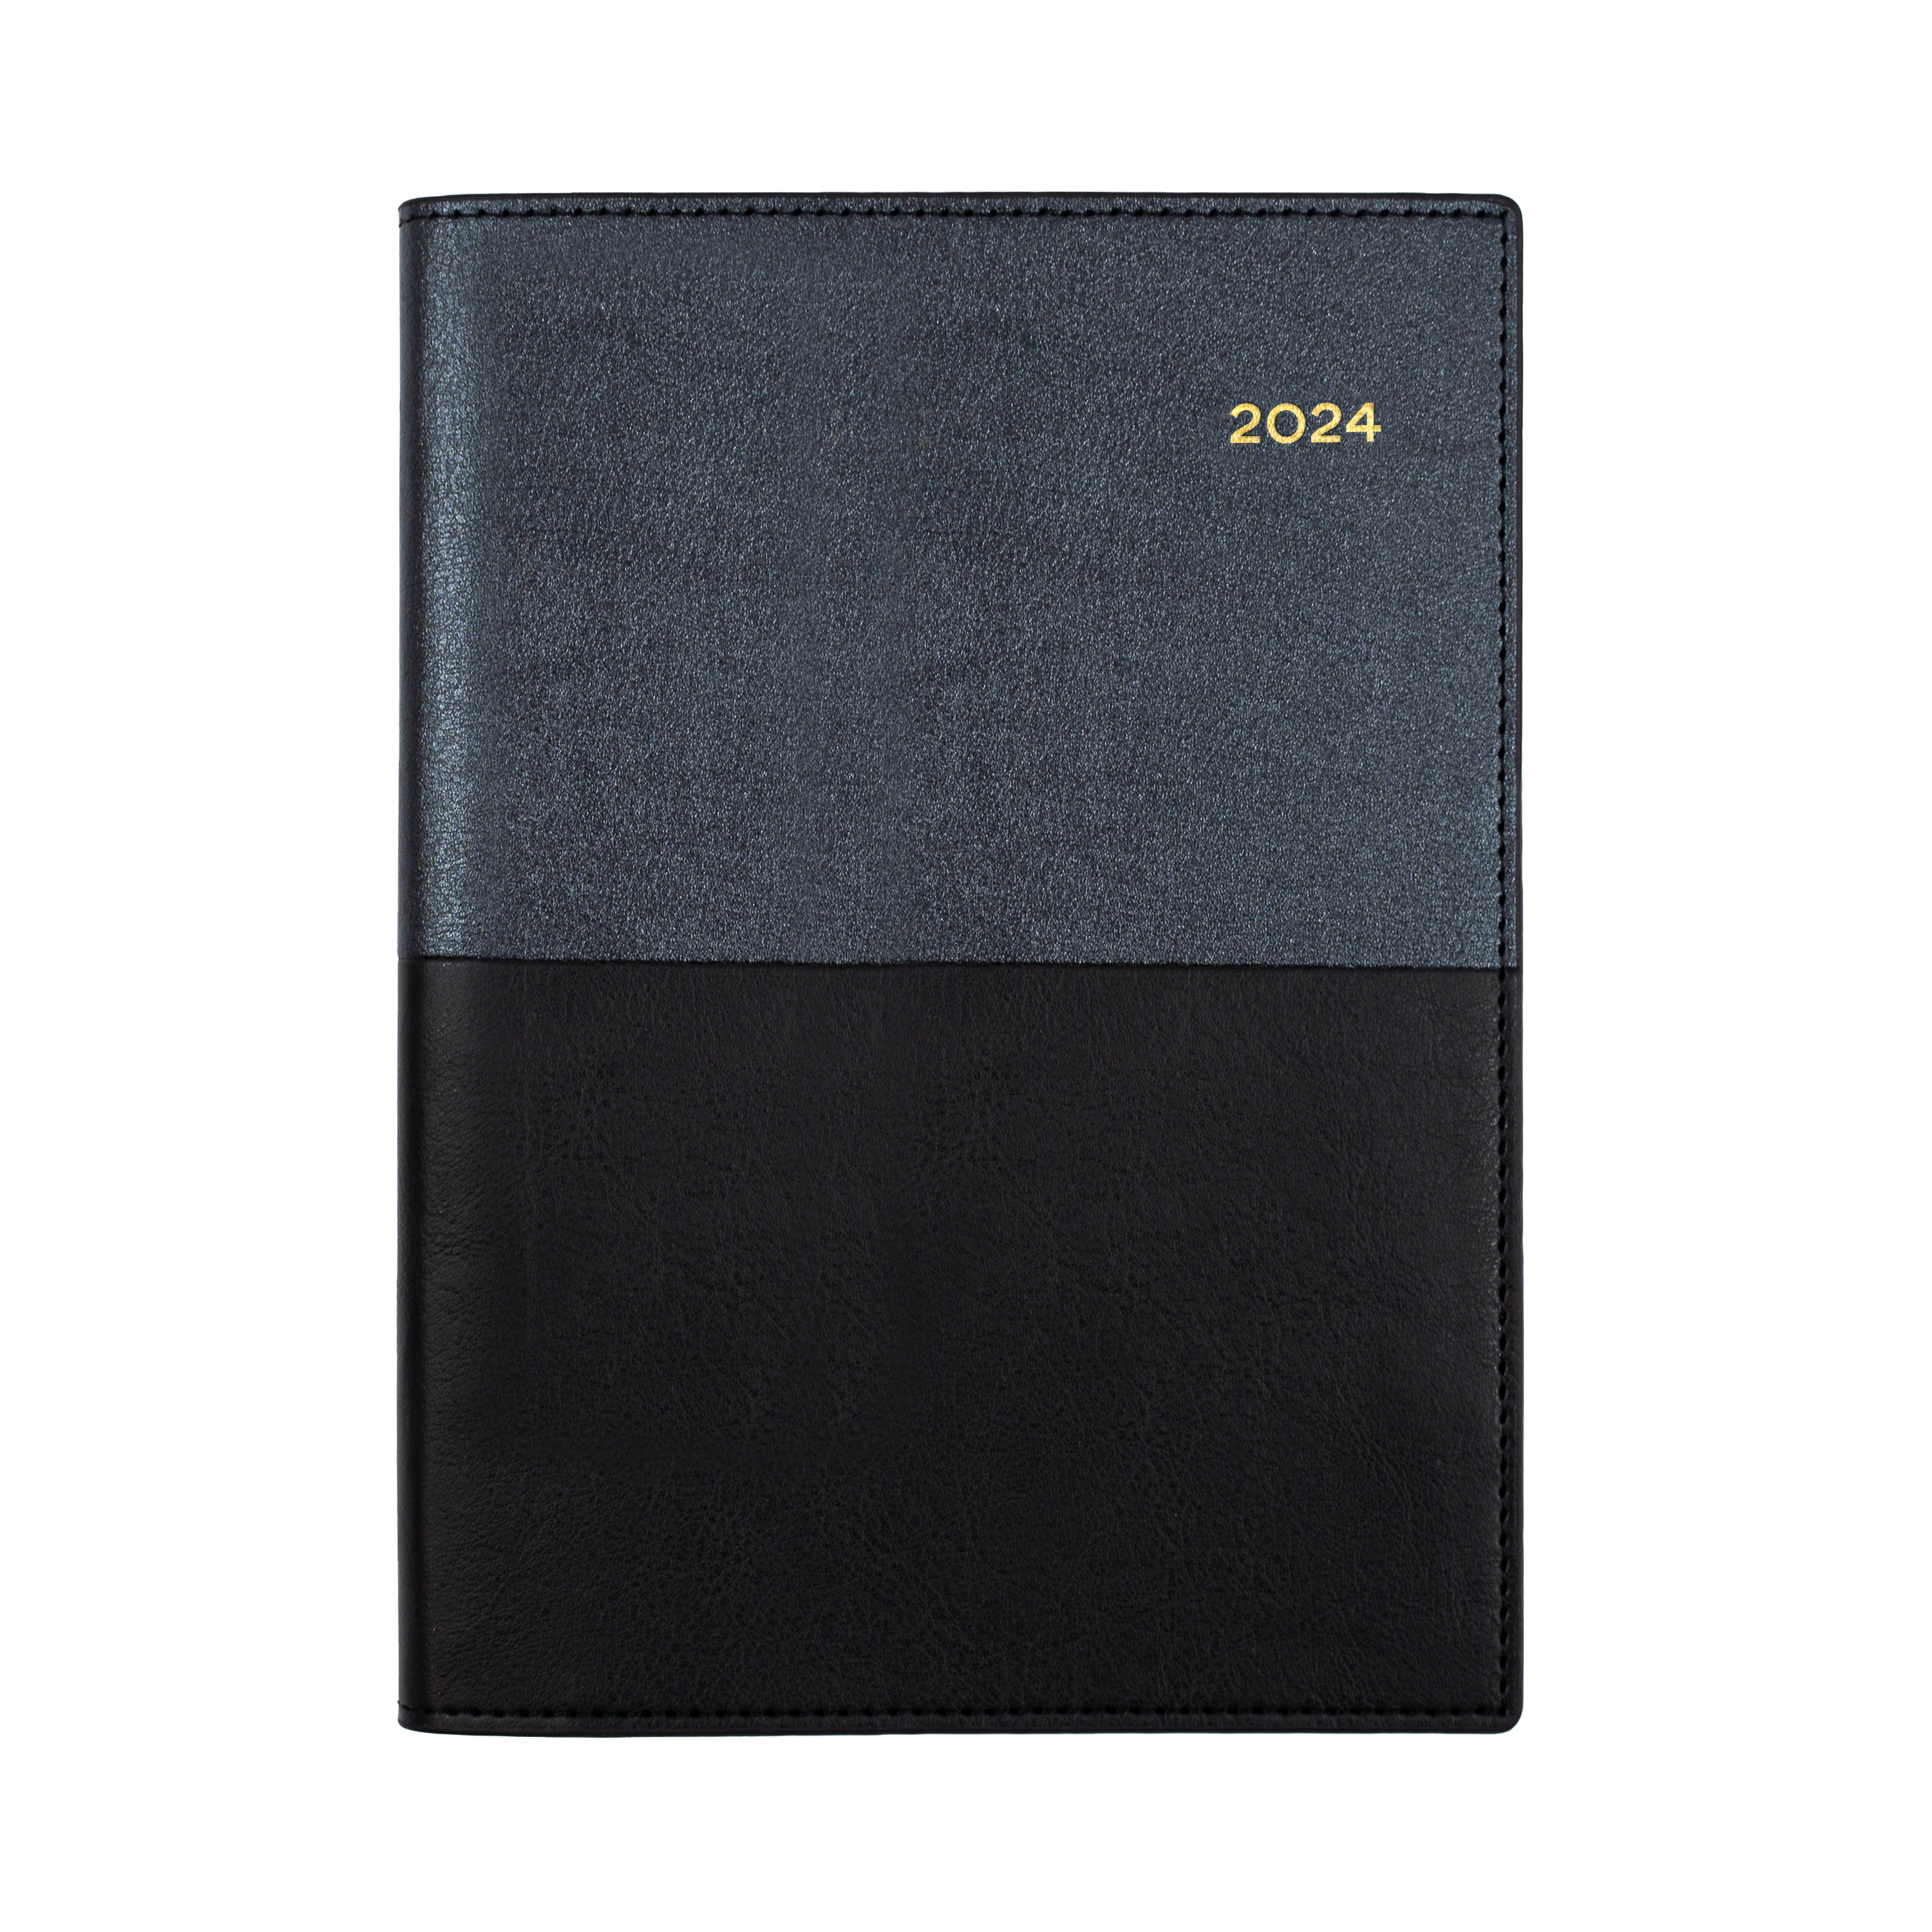 Collins Vanessa 2024 Diary - 2 Days to a Page View